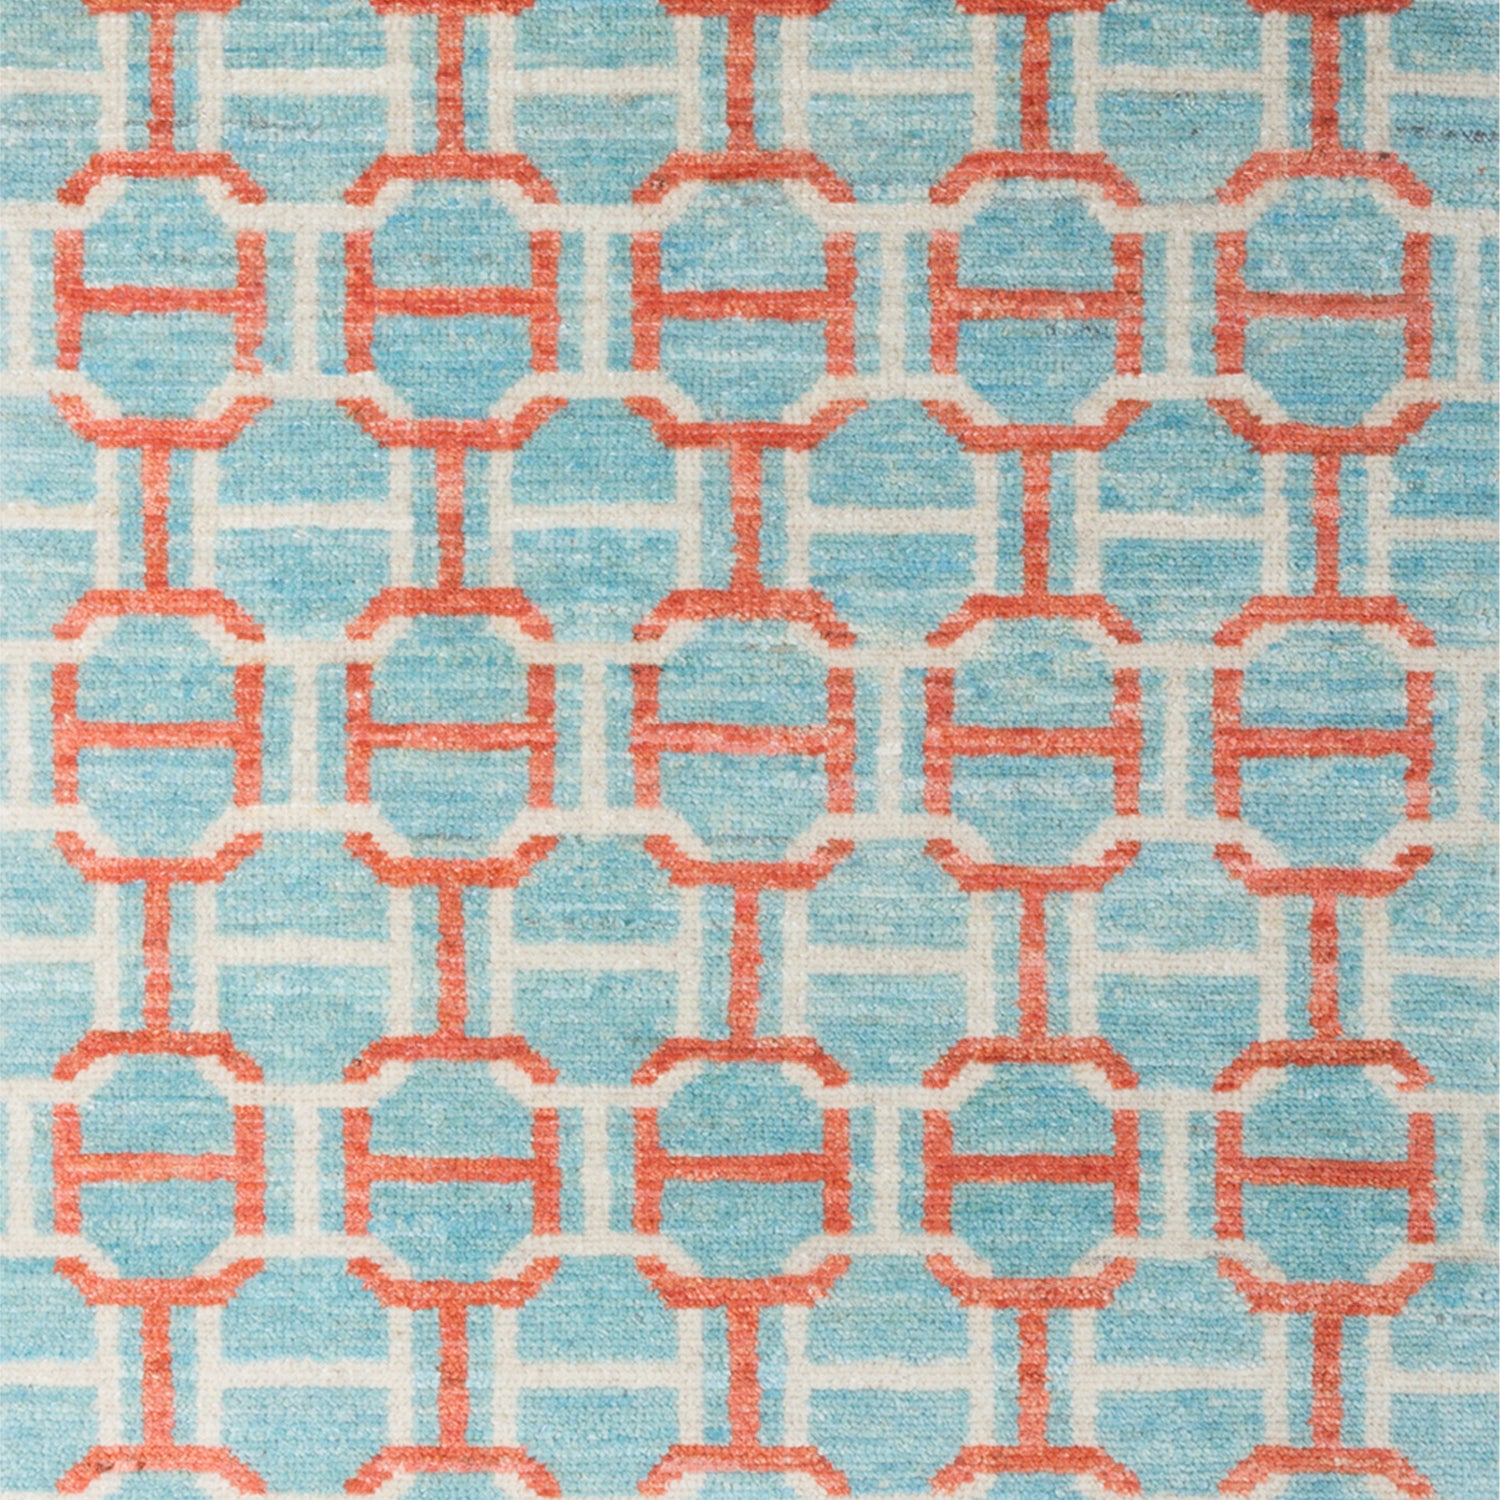 Woven rug swatch in an interlocking geometric buckle pattern in coral and white on a light blue field.